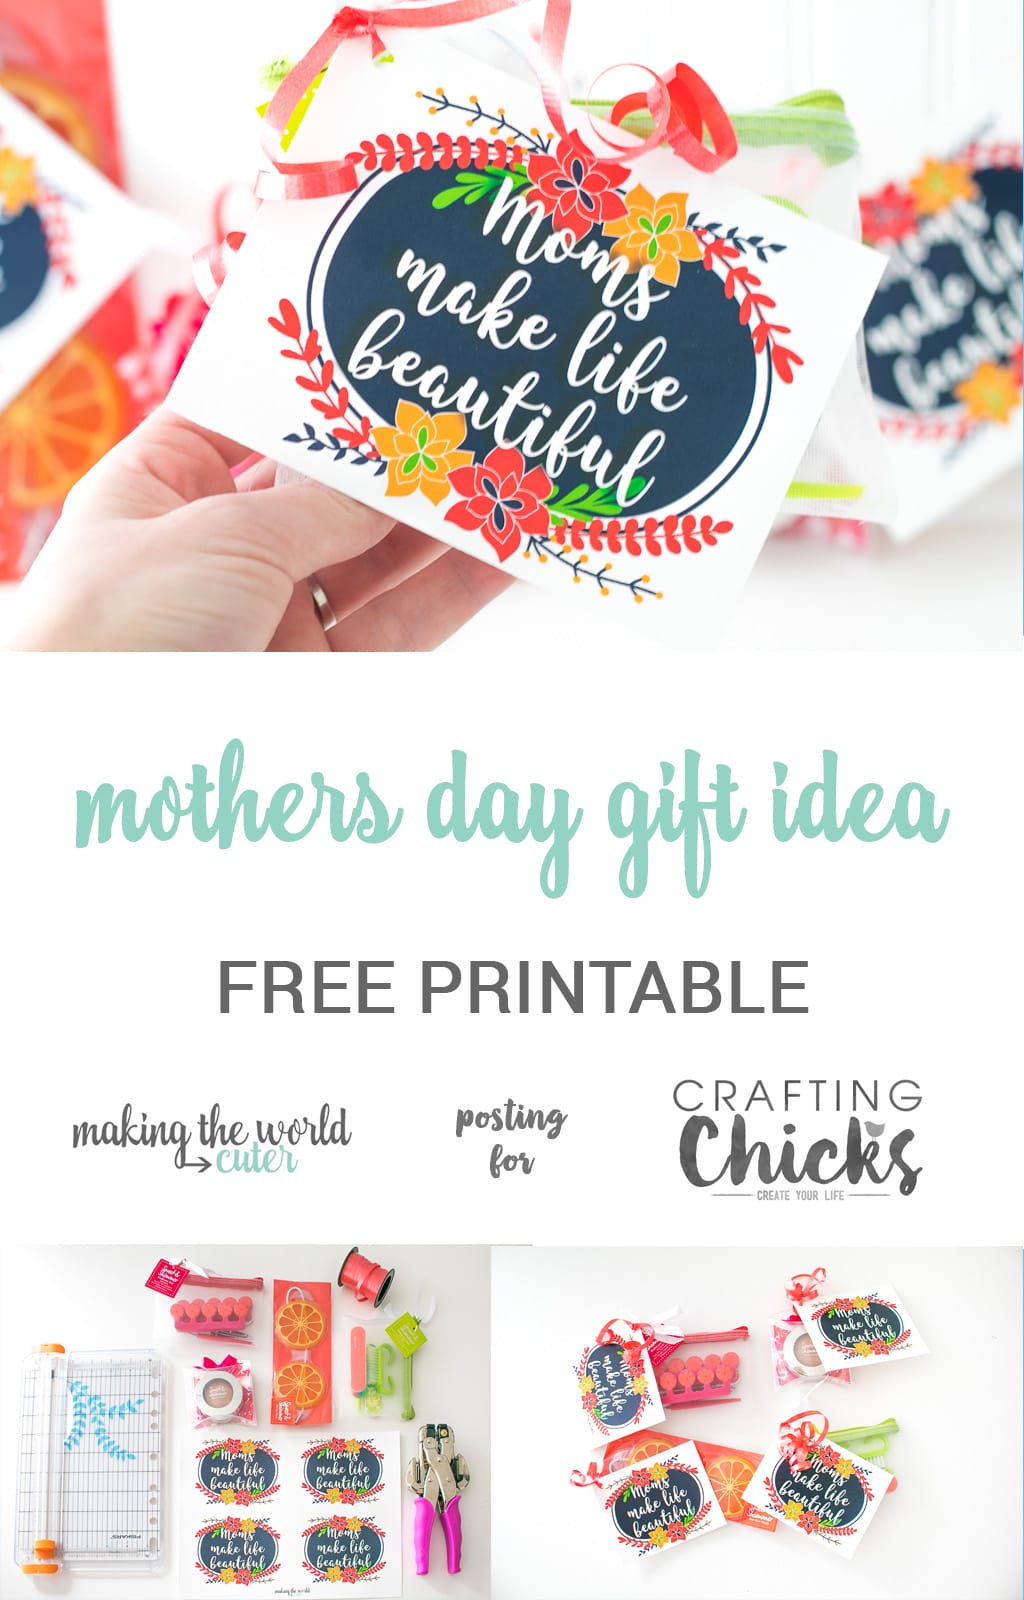 Mother's Day Gift Idea for Friends. Free printable gift tag with a sweet quote "Moms make Life Beautiful". Use it all year round for all the moms in your life!